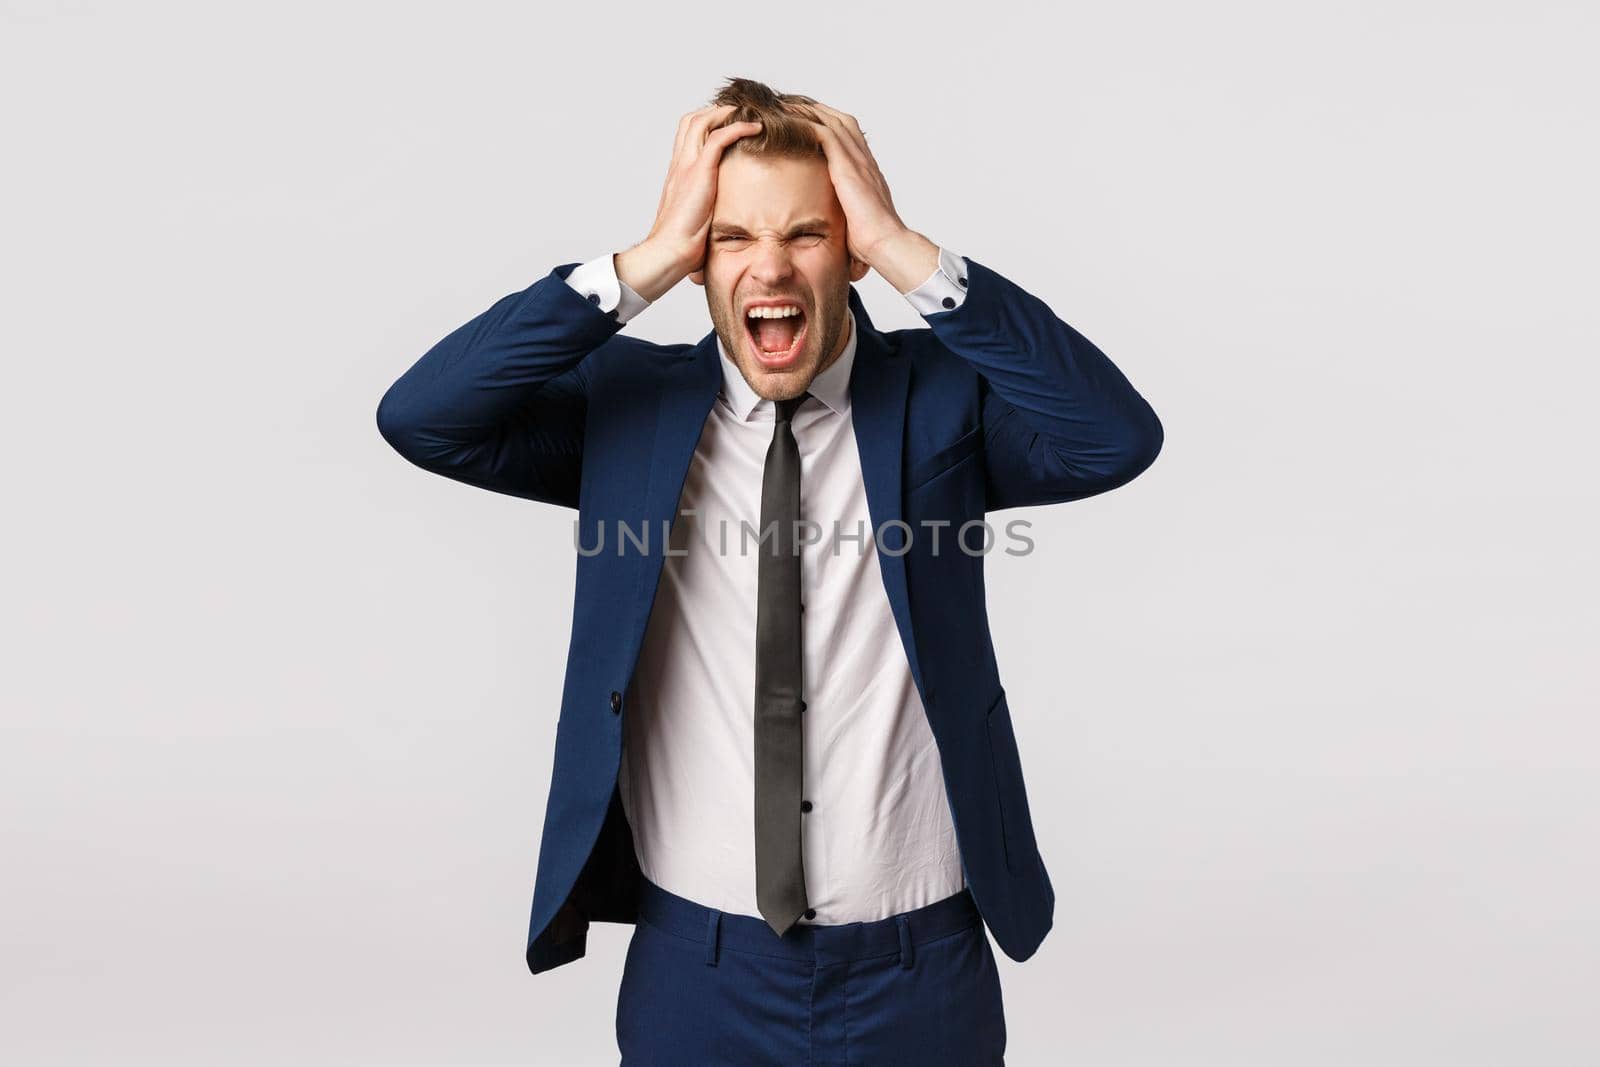 Distressed young businessman lost all money, feeling depressed and let down, frowning upset, screaming in rage, holding hands on head troubled, standing sad over white background. Copy space